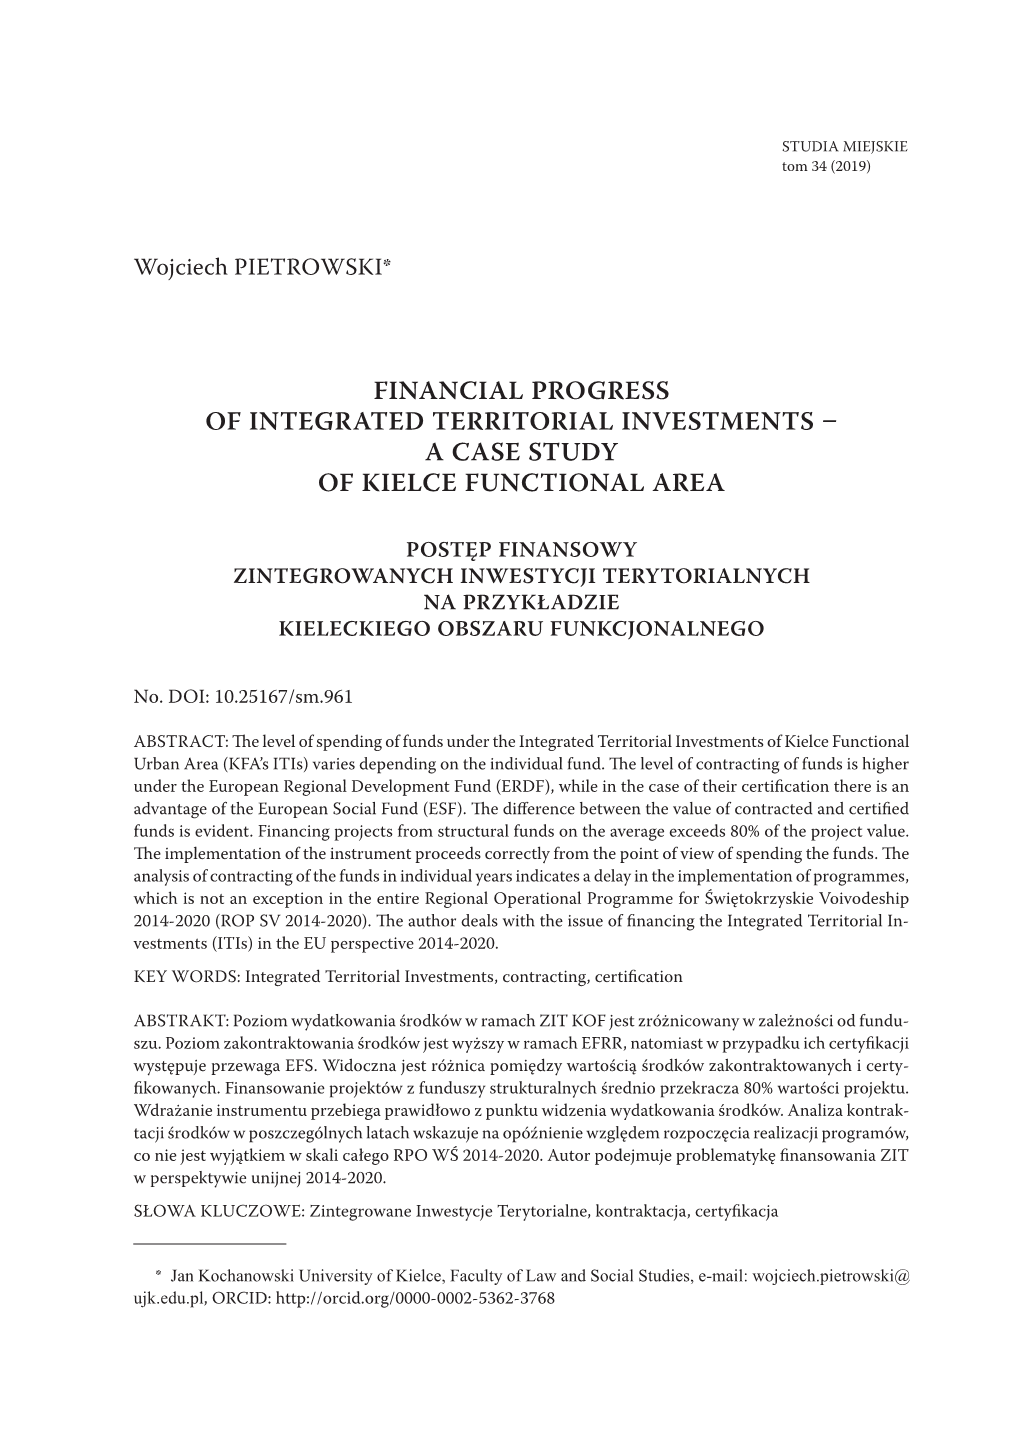 Financial Progress of Integrated Territorial Investments – a Case Study of Kielce Functional Area